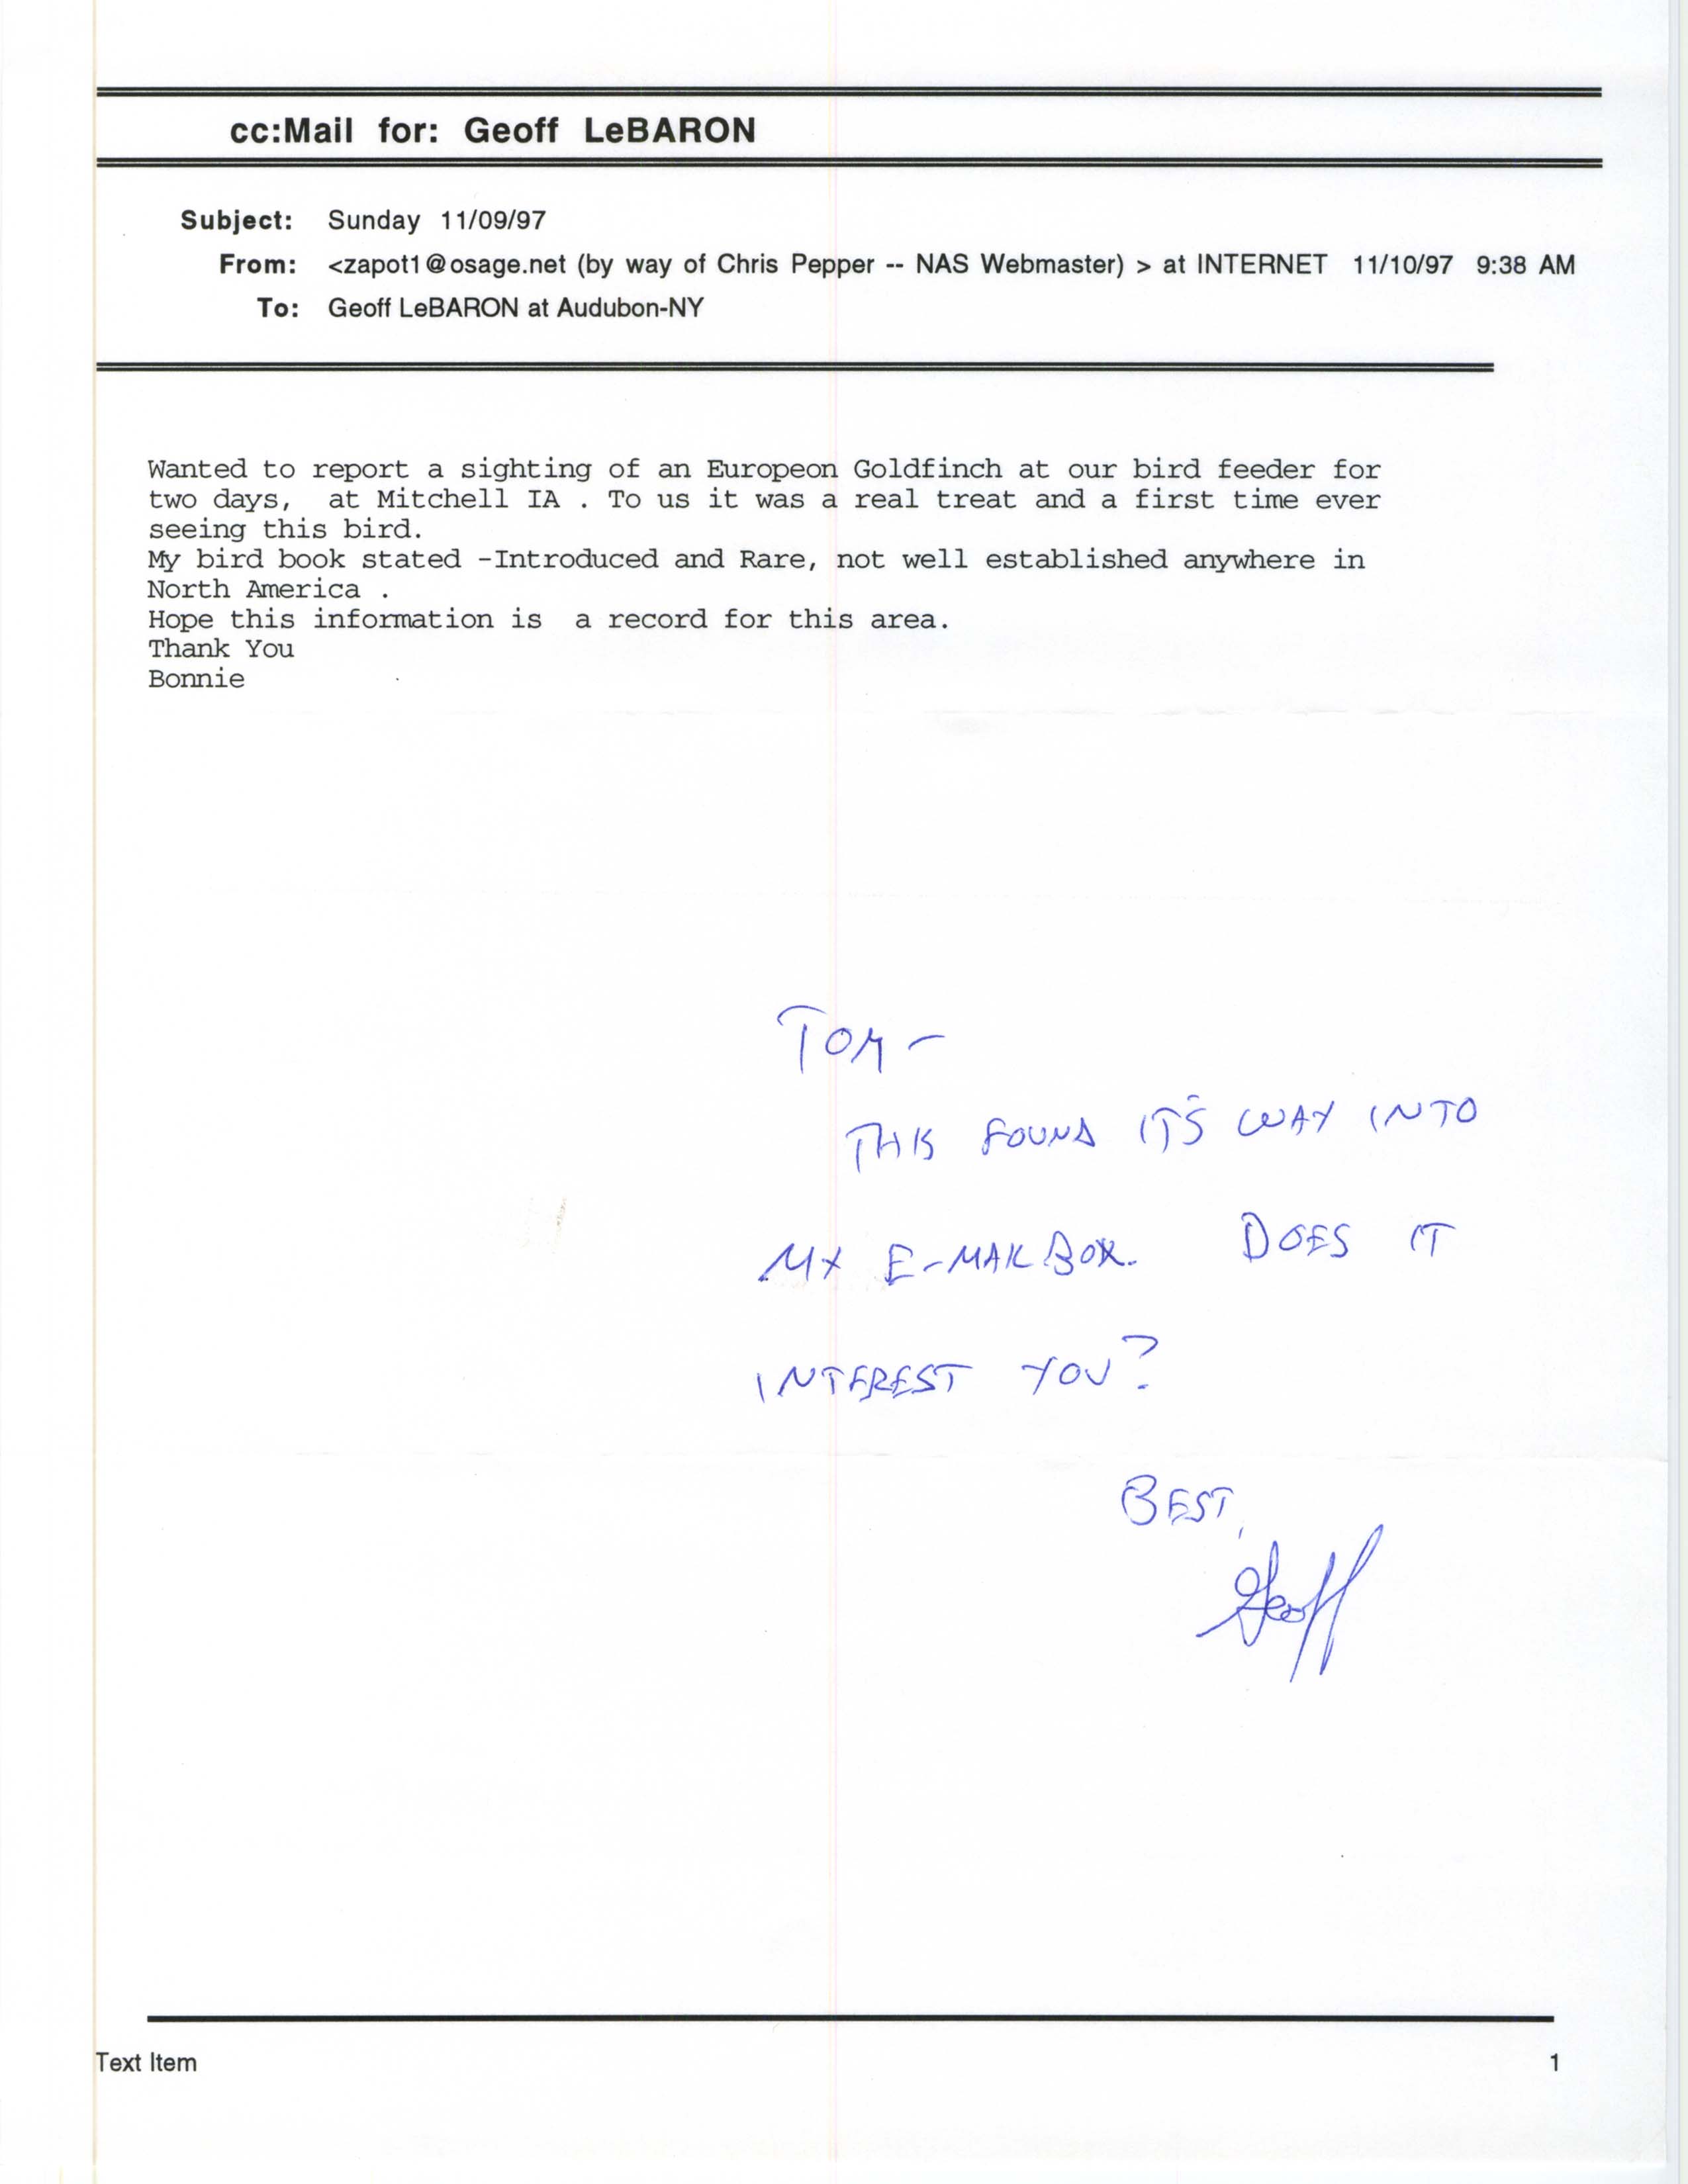 Geoffrey S. LeBaron note and forwarded email to Thomas H. Kent regarding a European Goldfinch sighting, November 10, 1997